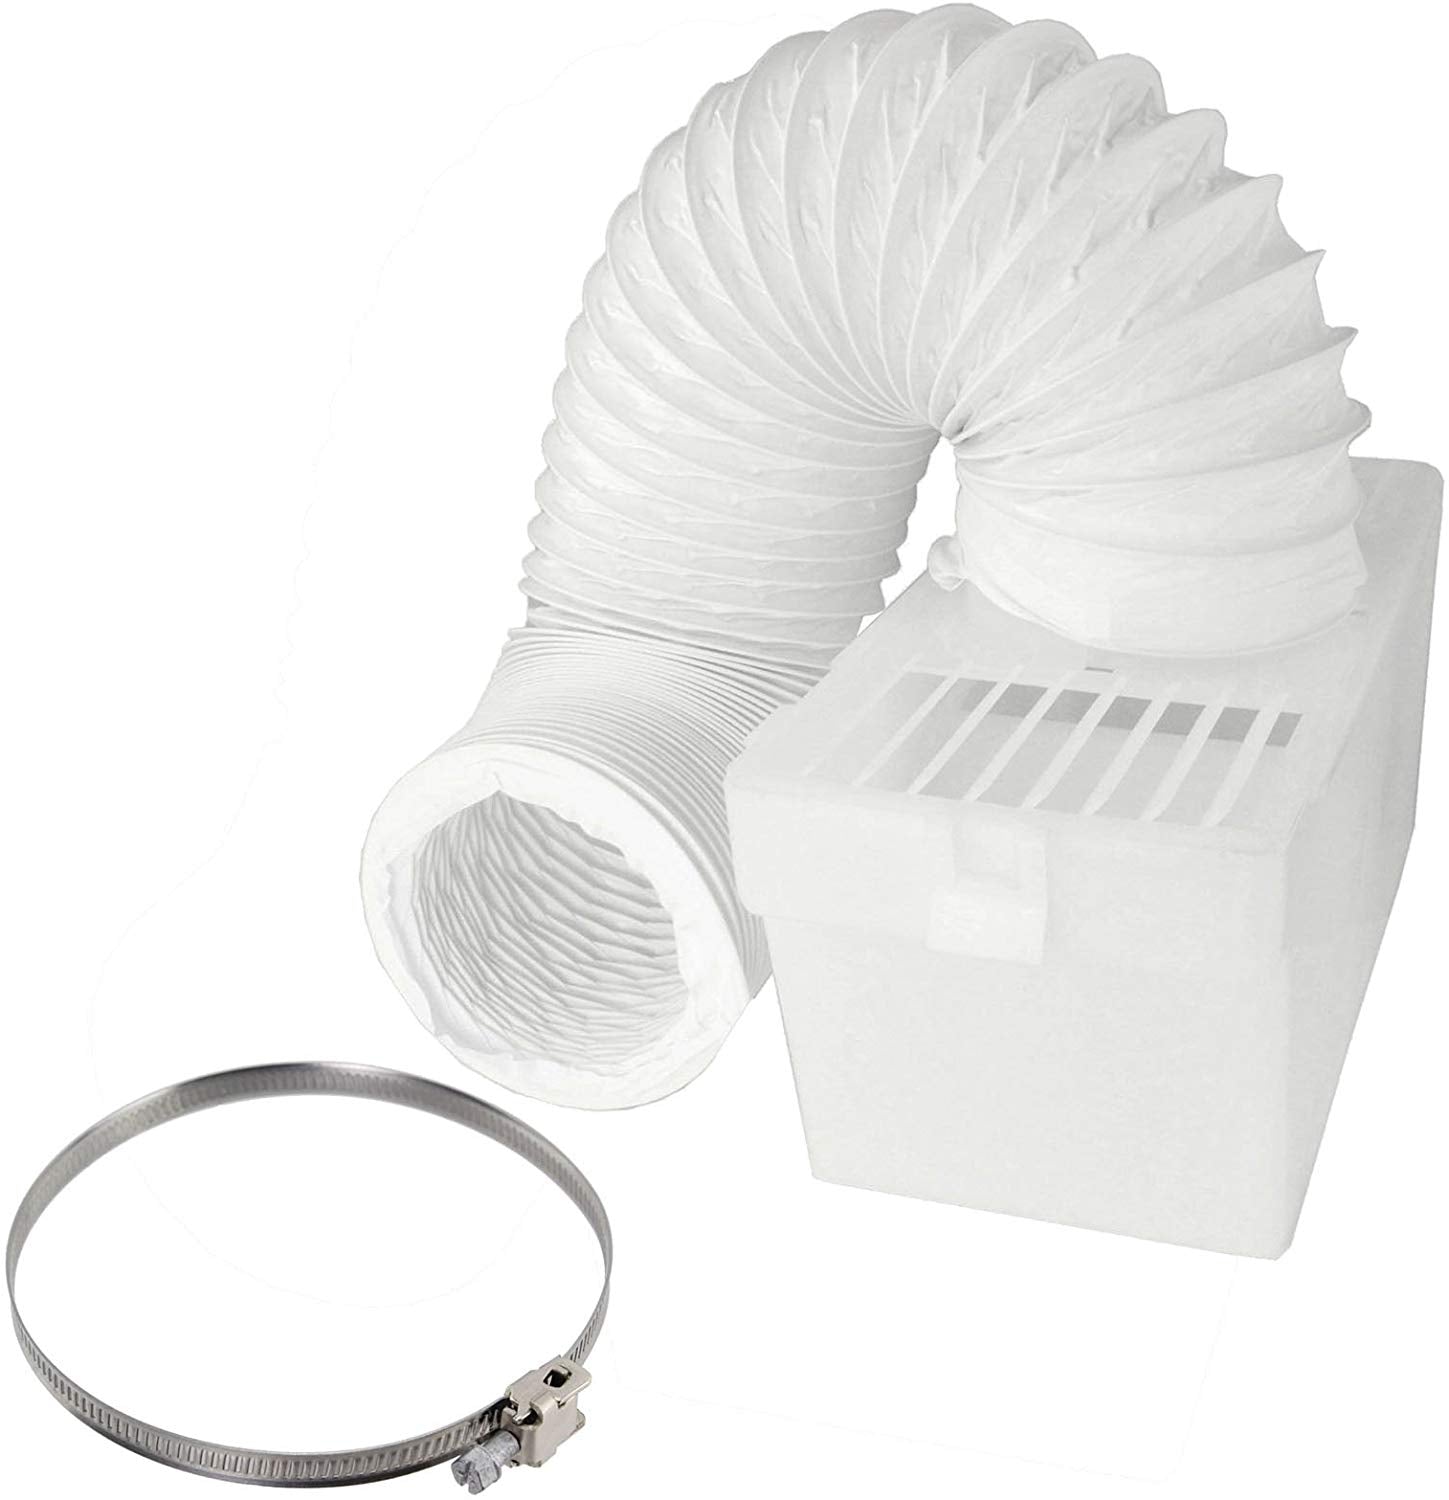 Condenser Vent Box & Hose Kit With Screw Clip for Crusader Vented Tumble Dryer (4" / 100mm Diameter)